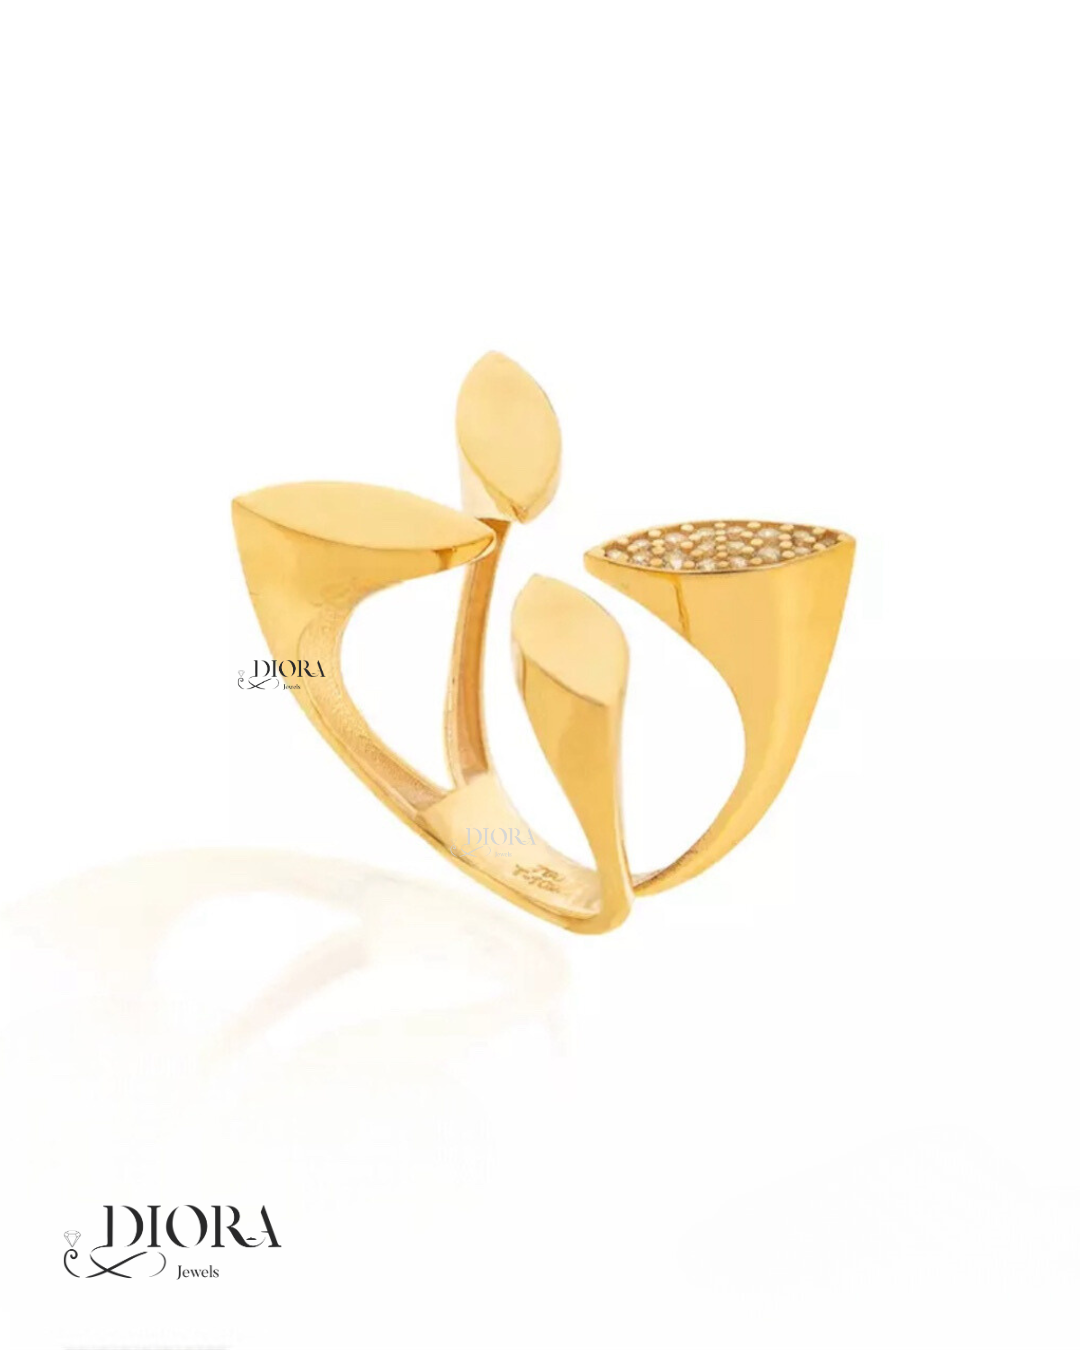 Jewelled Flower Ring - 4 Petals